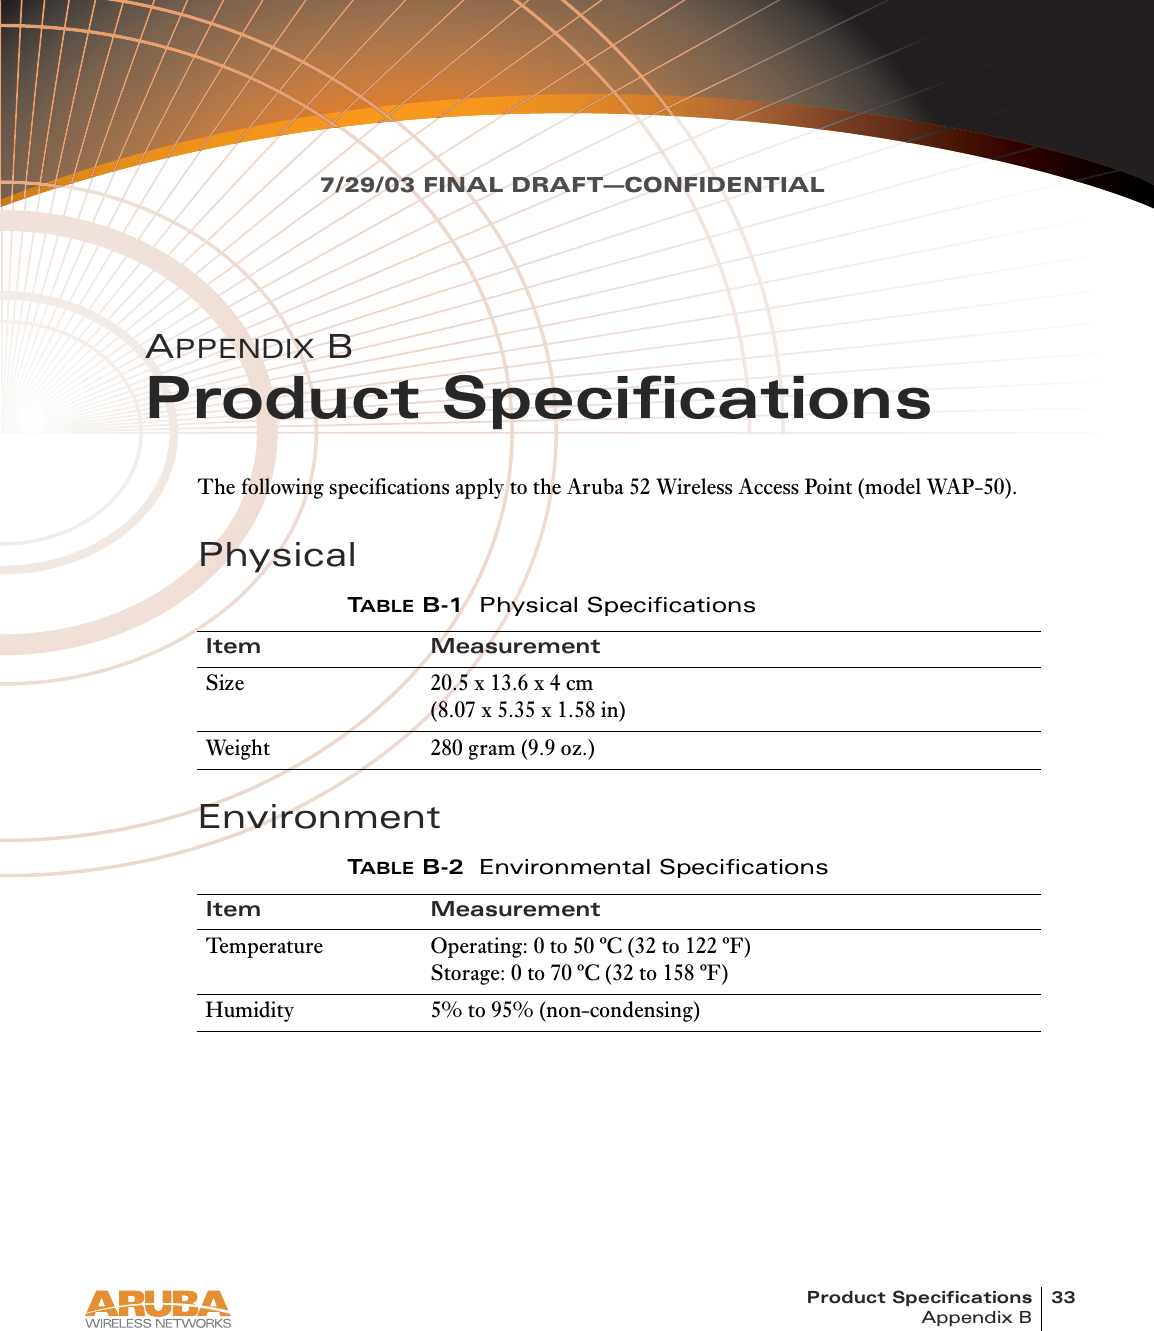 Product Specifications 33Appendix B7/29/03 FINAL DRAFT—CONFIDENTIALAPPENDIX BProduct SpecificationsThe following specifications apply to the Aruba 52 Wireless Access Point (model WAP-50).PhysicalEnvironmentTABLE B-1 Physical SpecificationsItem MeasurementSize 20.5 x 13.6 x 4 cm(8.07 x 5.35 x 1.58 in)Weight 280 gram (9.9 oz.)TABLE B-2 Environmental SpecificationsItem MeasurementTemperature Operating: 0 to 50 ºC (32 to 122 ºF)Storage: 0 to 70 ºC (32 to 158 ºF)Humidity 5% to 95% (non-condensing)